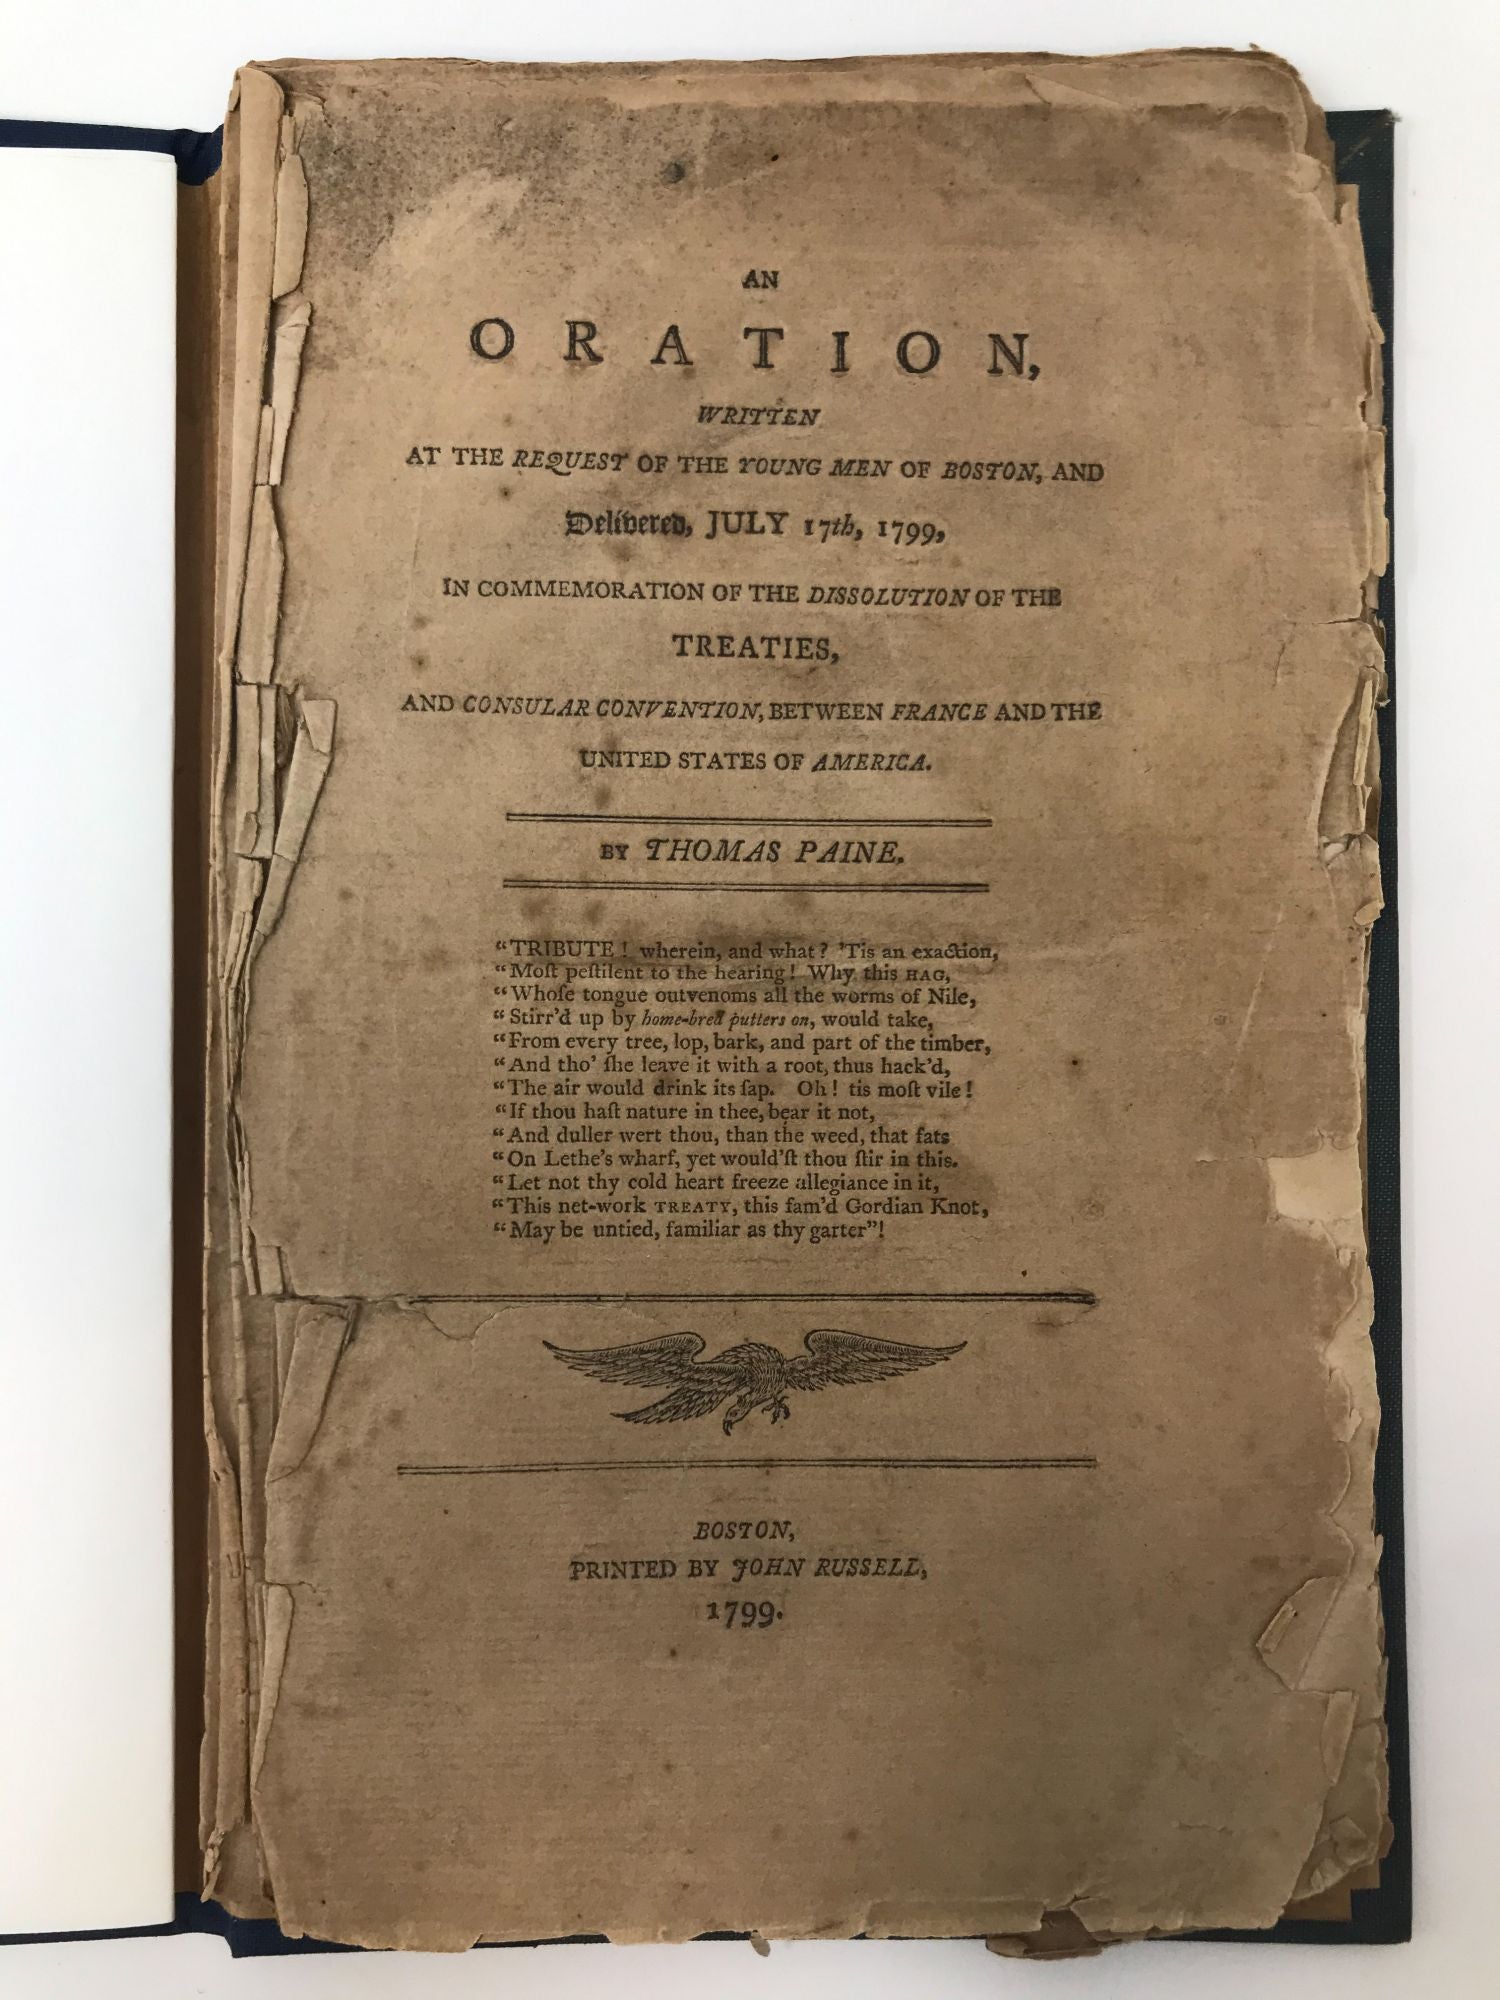 Treat, Robert, Jr. (WRITING AS Thomas Paine) - An Oration, Written at the Request of the Young Men of Boston, and Delivered, July 17th, 1799 in Commemoration of the Dissolution of the Treaties, and Consular Convention, between France and the New United States of America